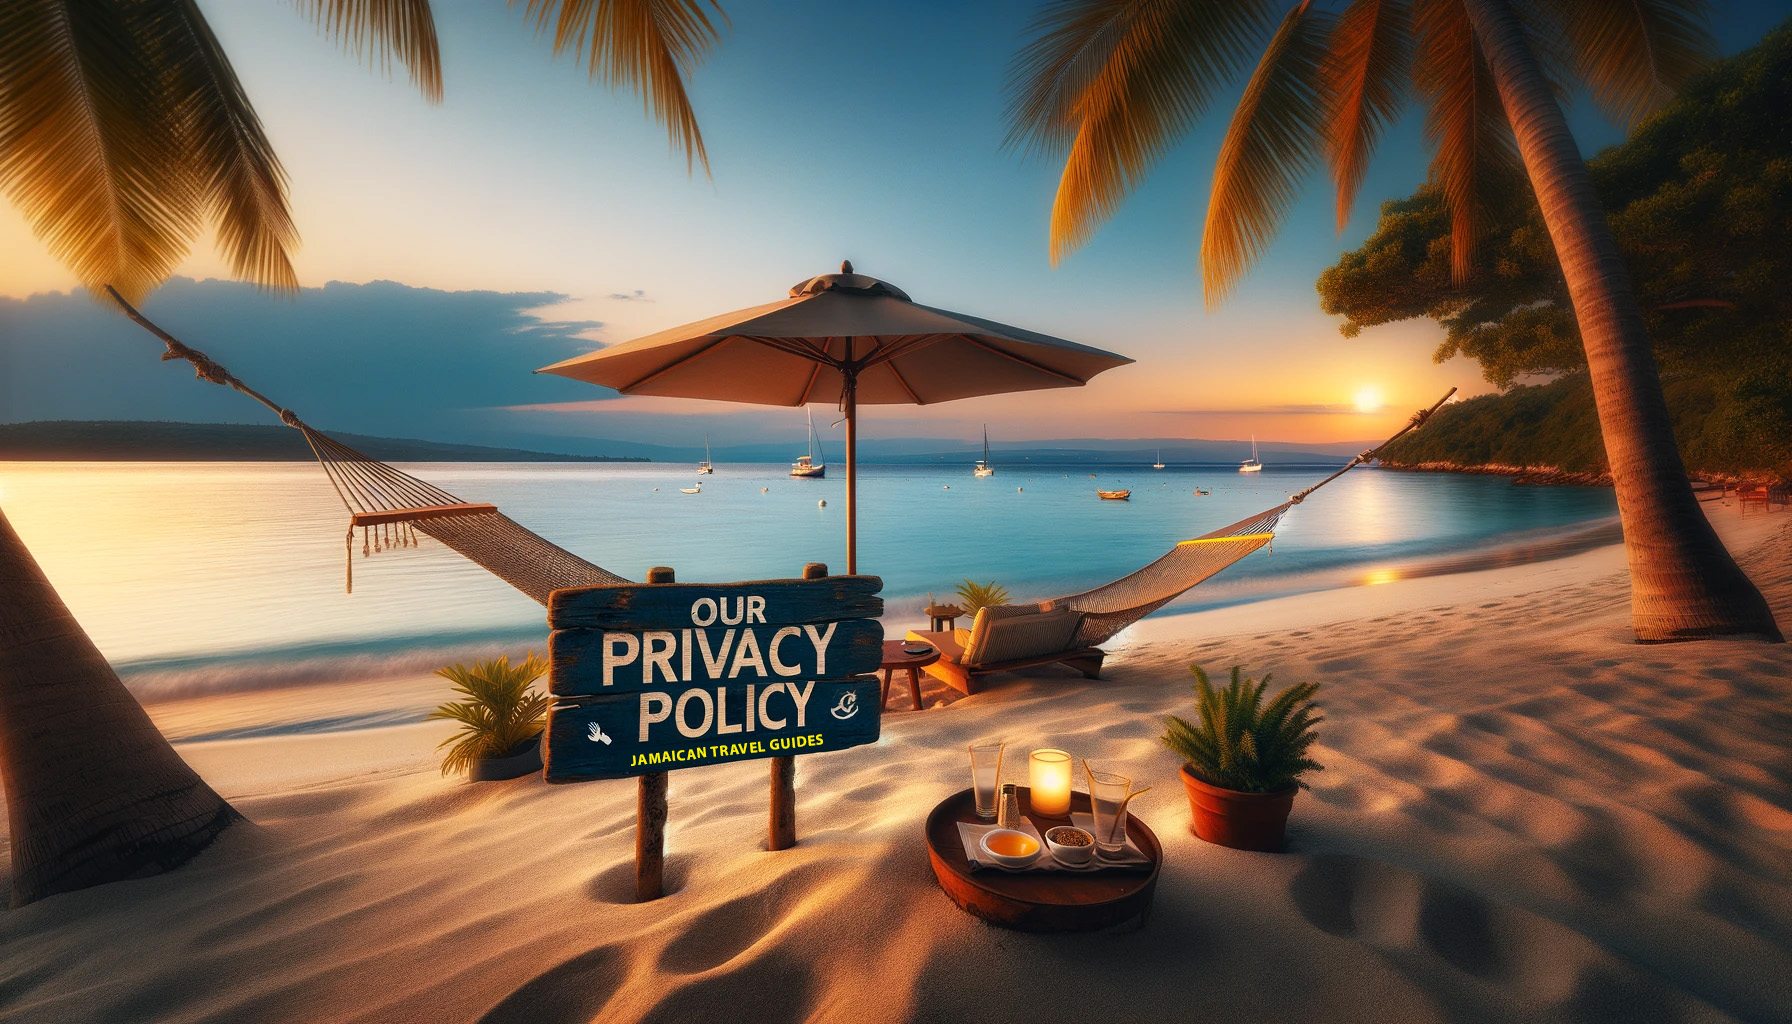 Our Privacy Policy - Jamaican Travel Guides